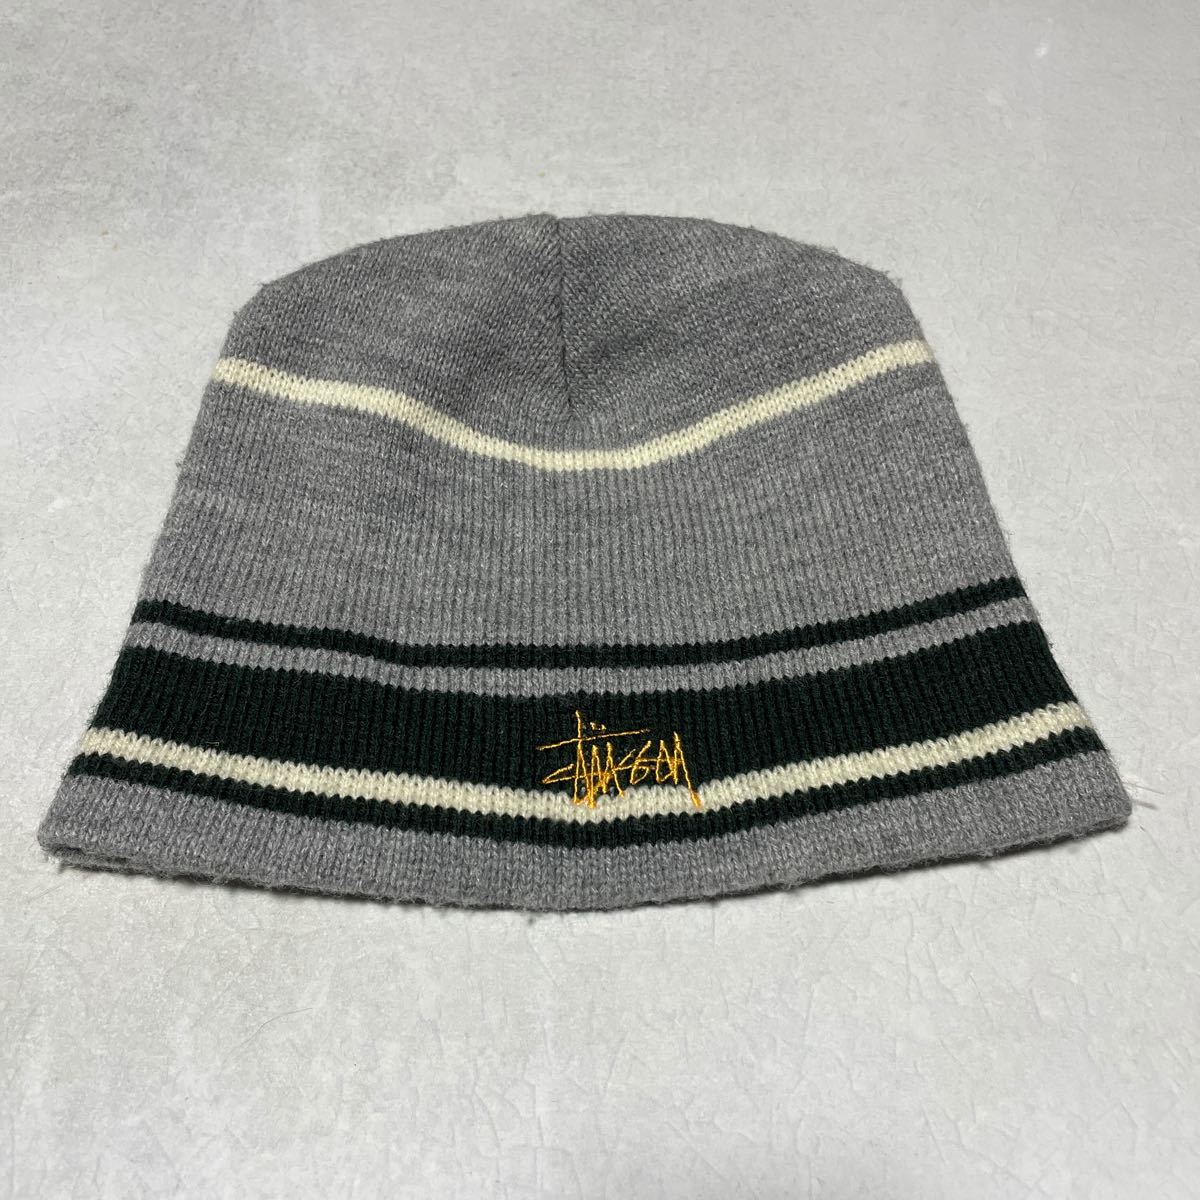 90s 00s STUSSY Stussy border Beanie knit cap knitted cap gray Old